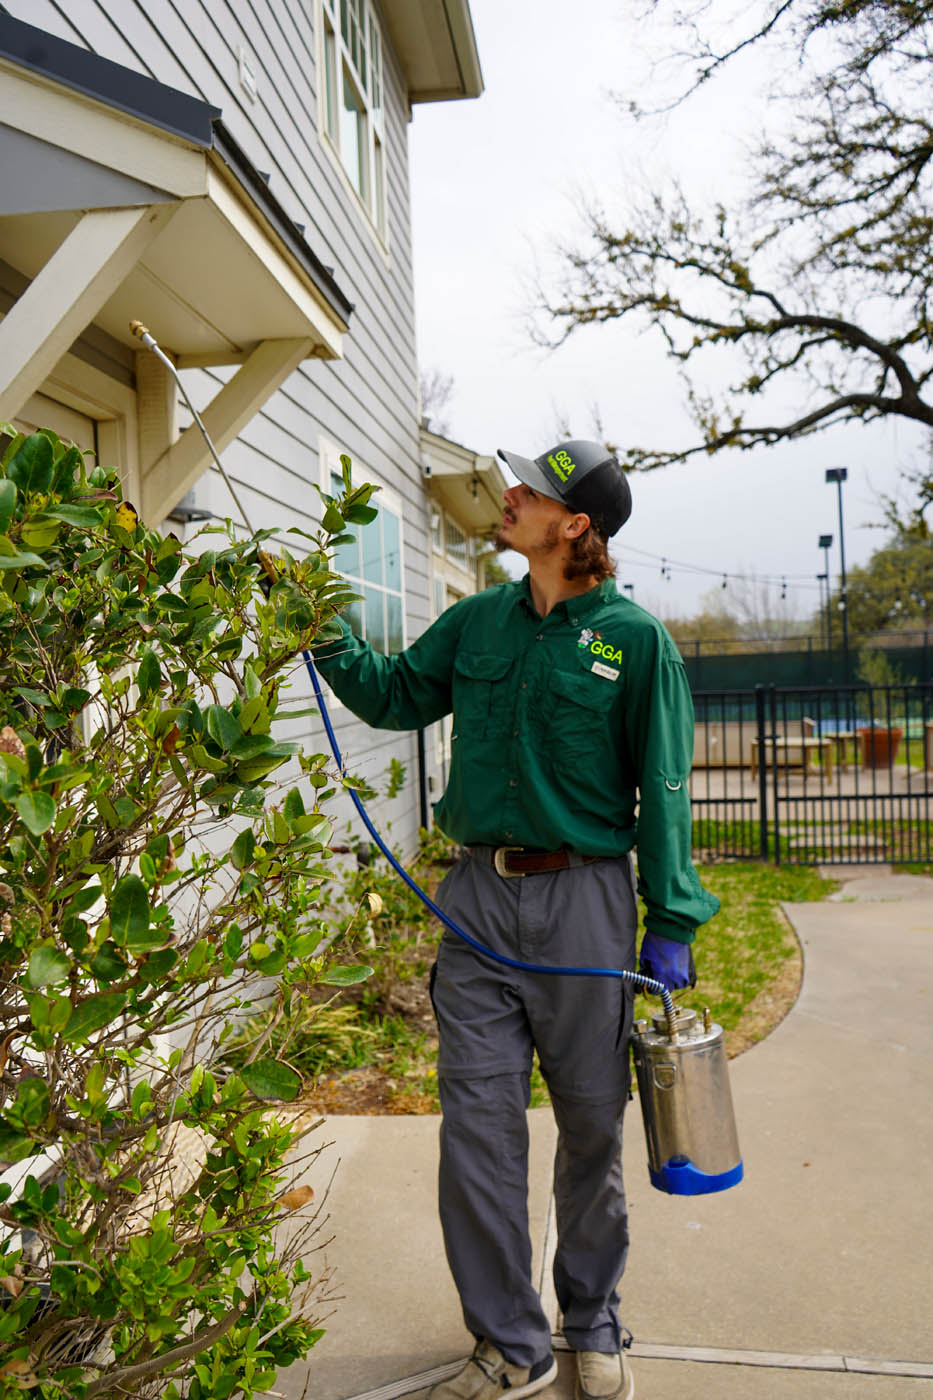 A GGA Pest Management employee working on residential home - choose GGA Pest Management for the best Killeen exterminator pest control services.